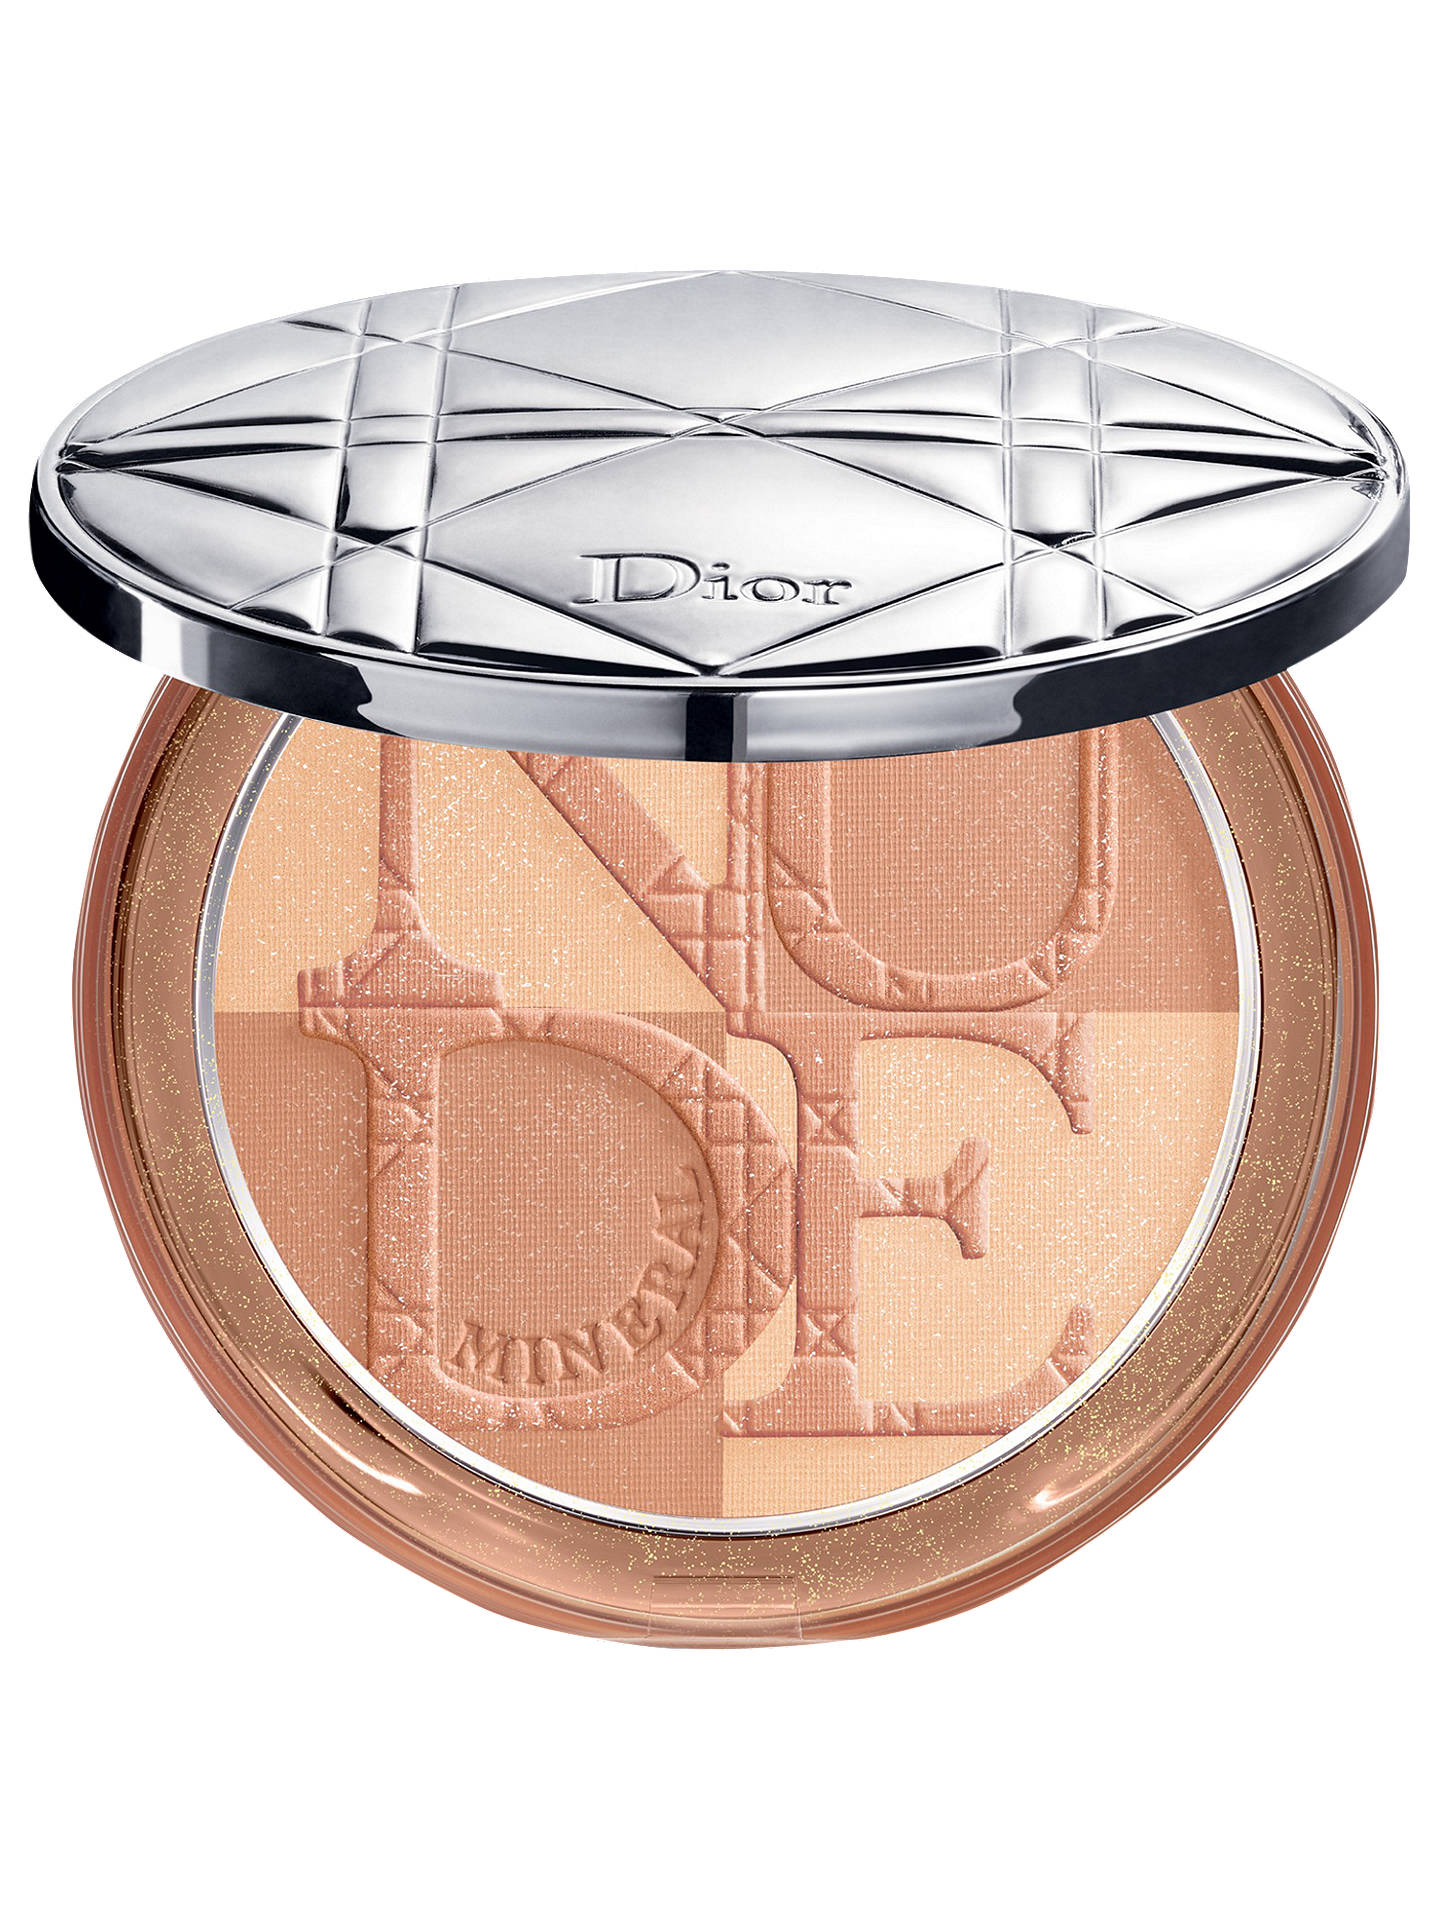 DIOR Diorskin Mineral Nude Bronze - Color Games Collection 